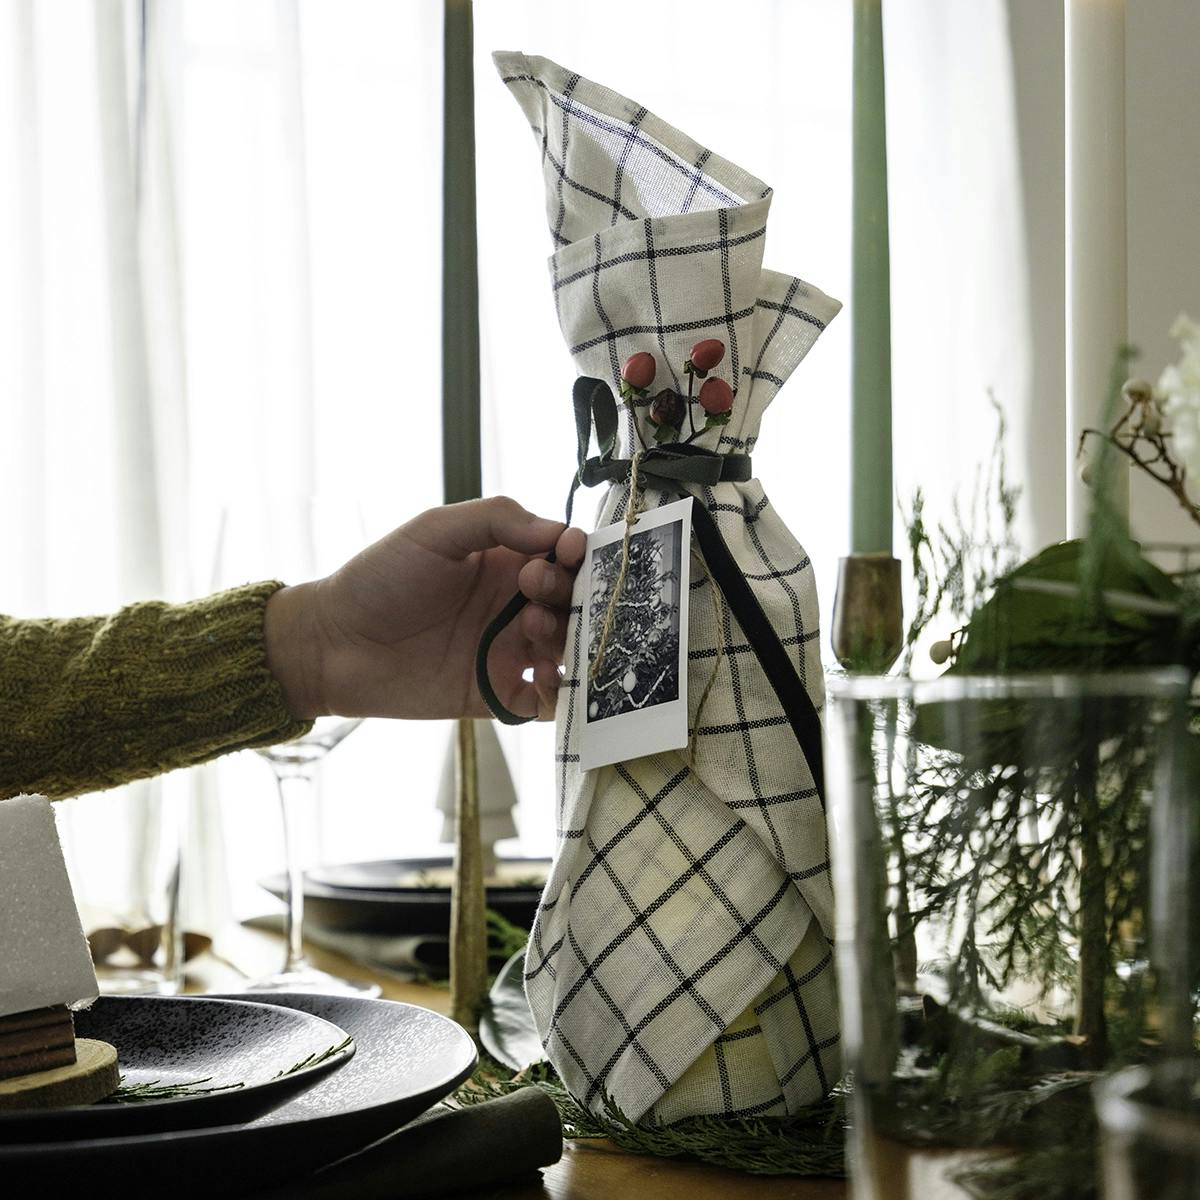 Wine bottle wrapped in a tea towel and placed on a Christmas dining table.